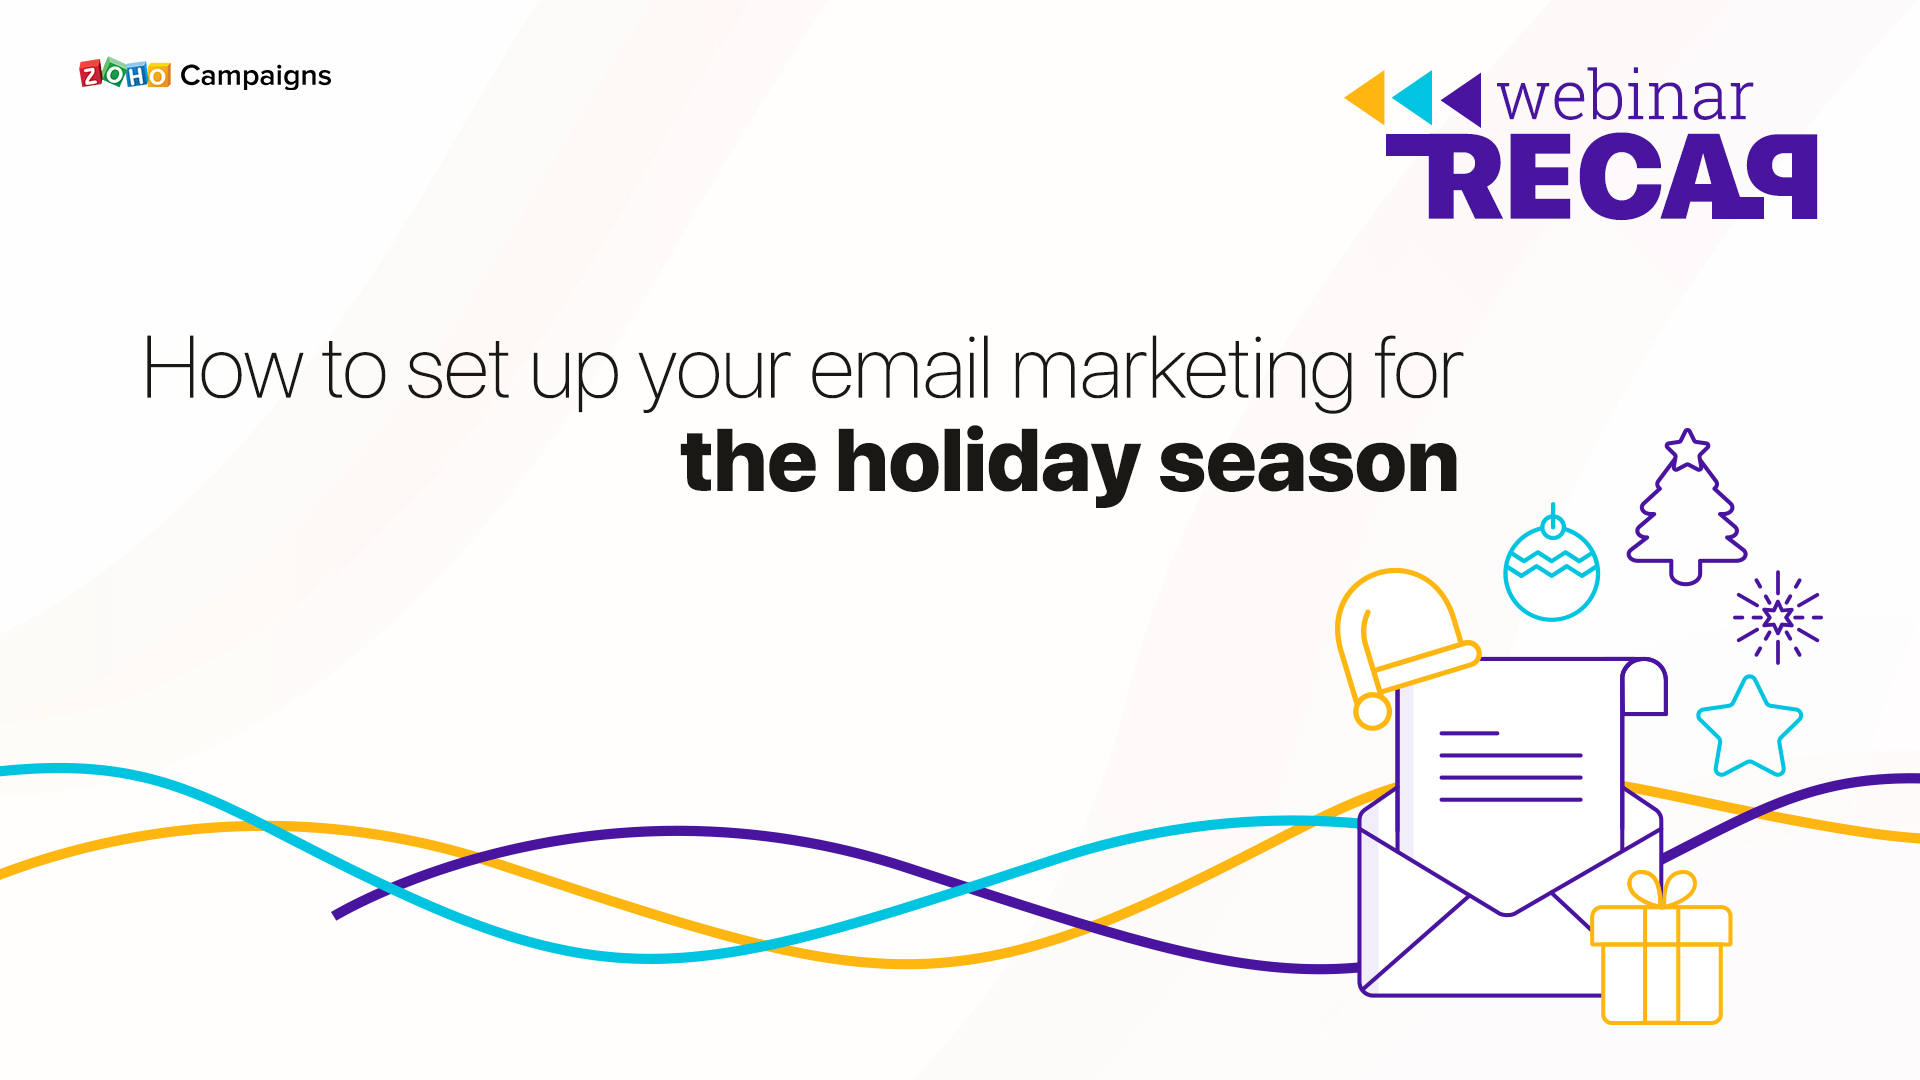 Webinar Recap: How to set up your email marketing for the holiday season 